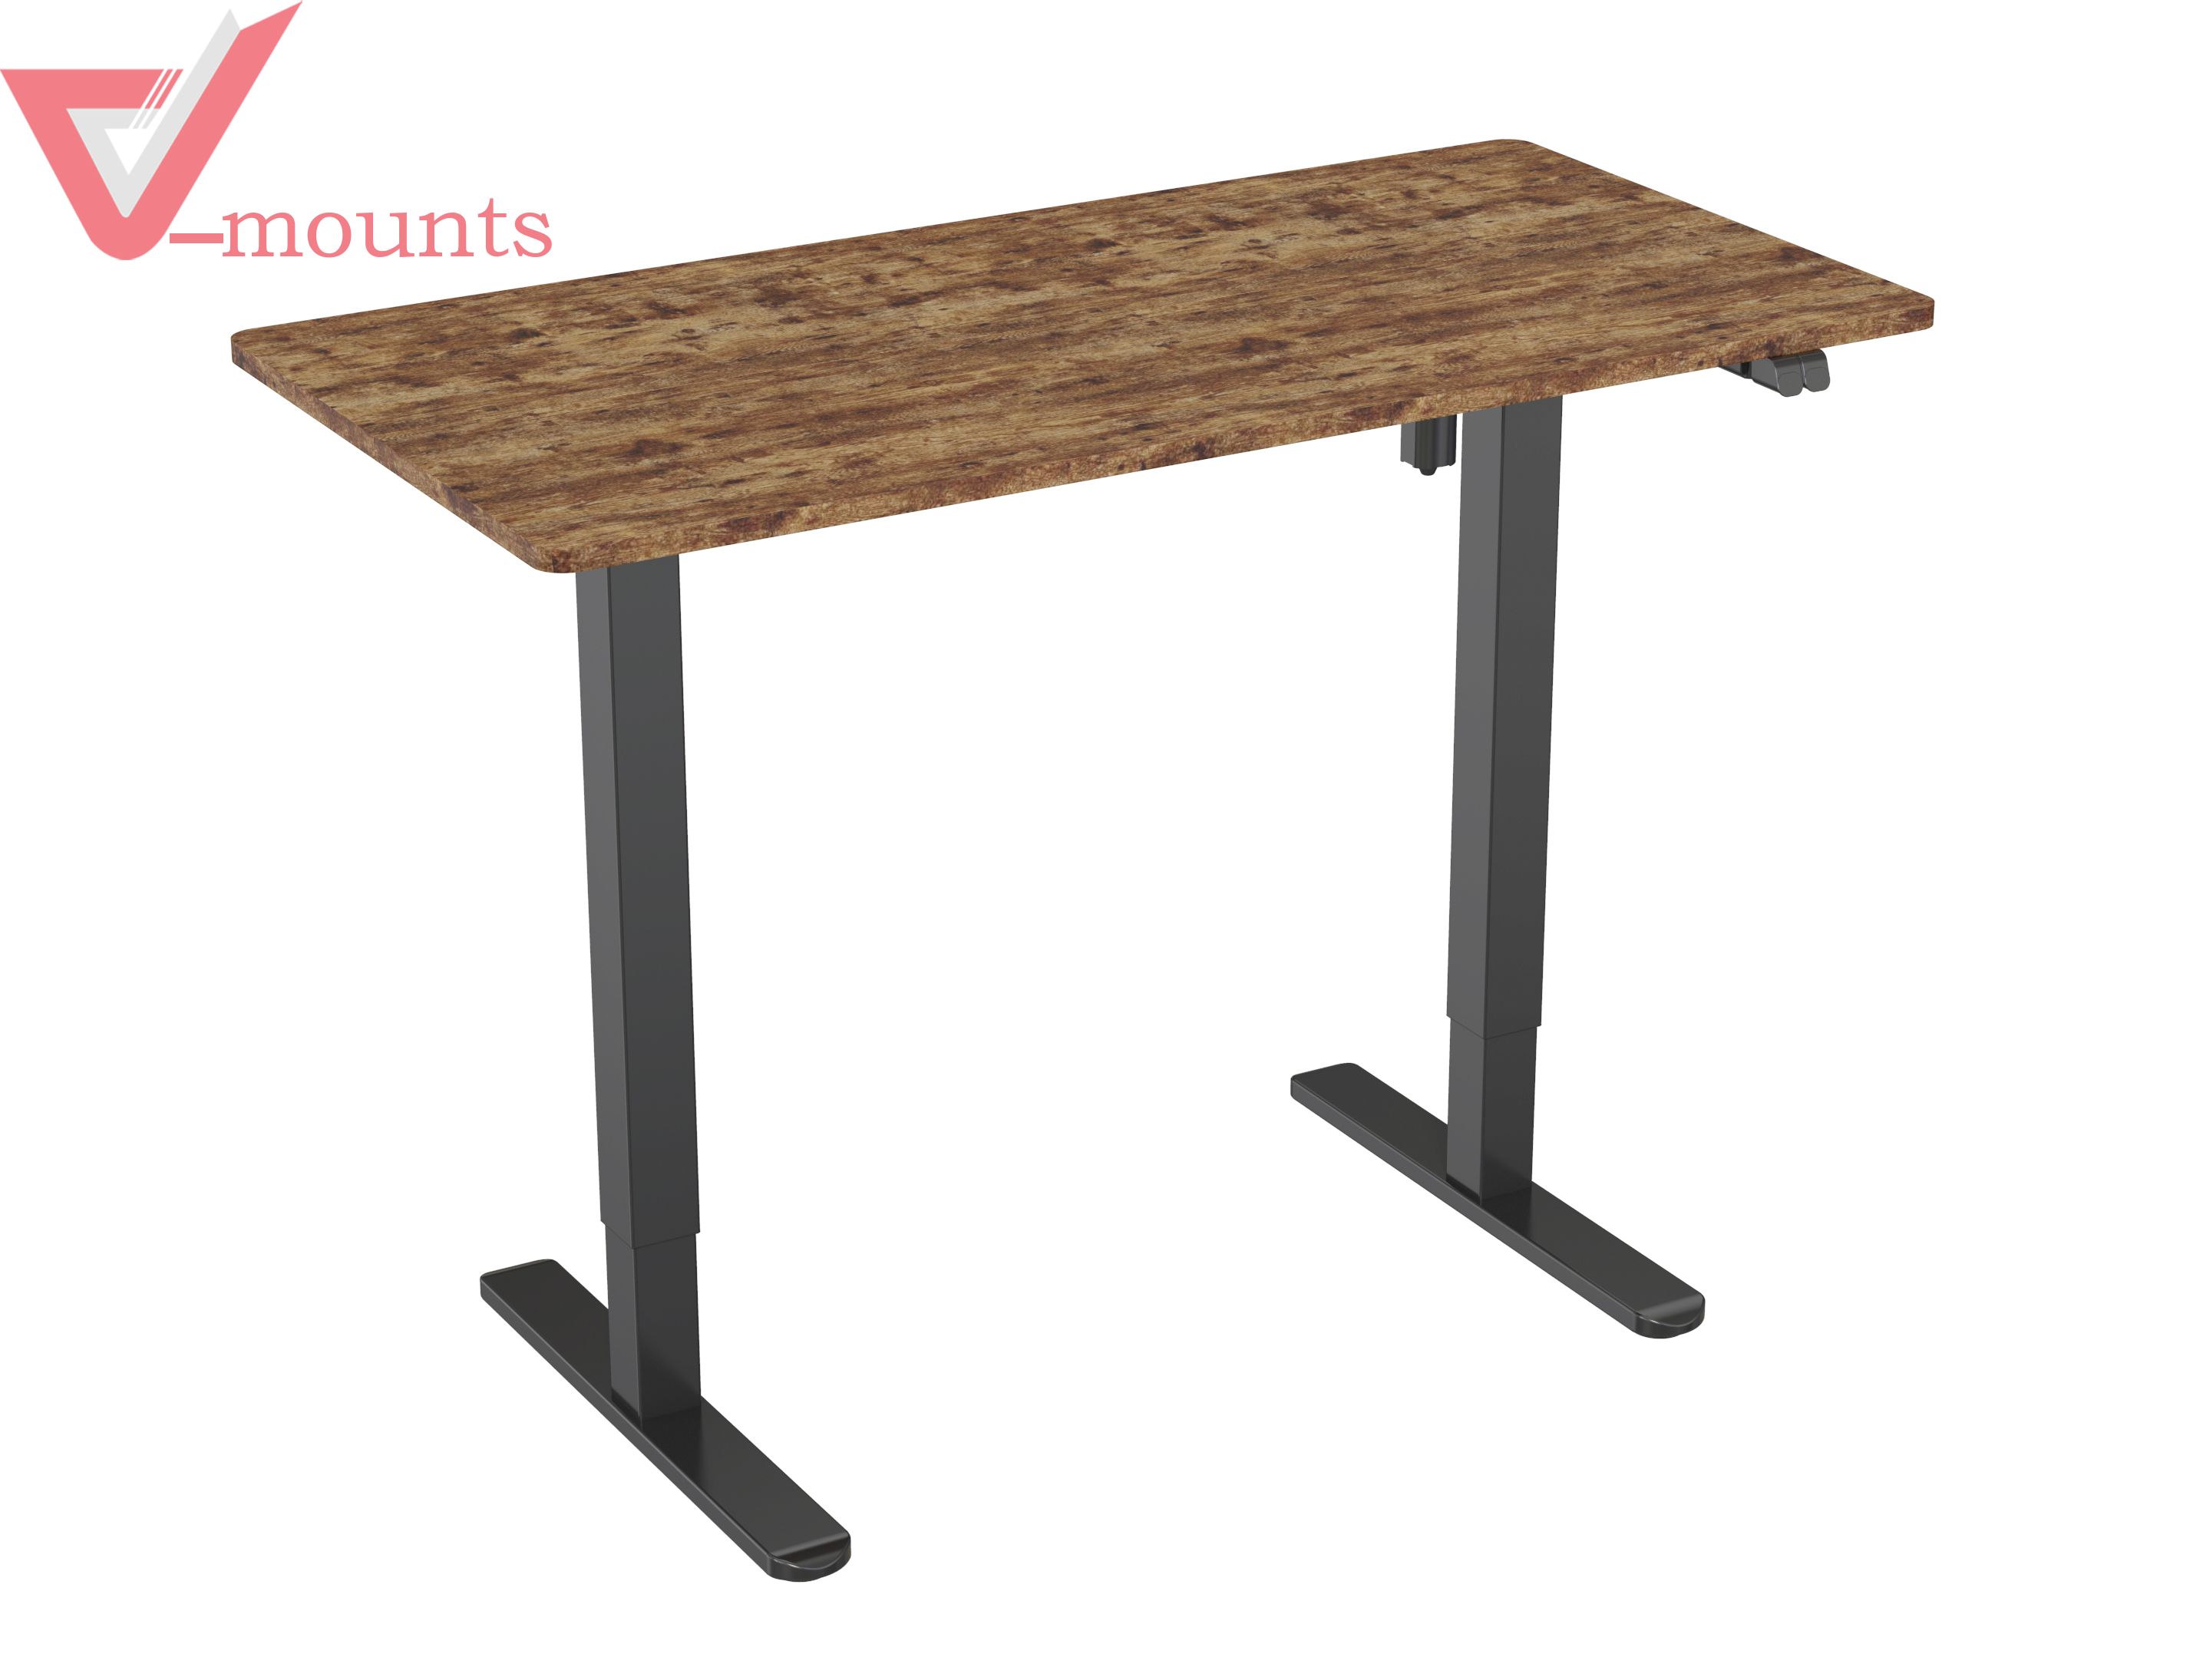 V-mounts Electric Single Motor Height Adjustable Standing Desks With 2 Spliced Boards And Square Legs VM-JSD5-01-2P